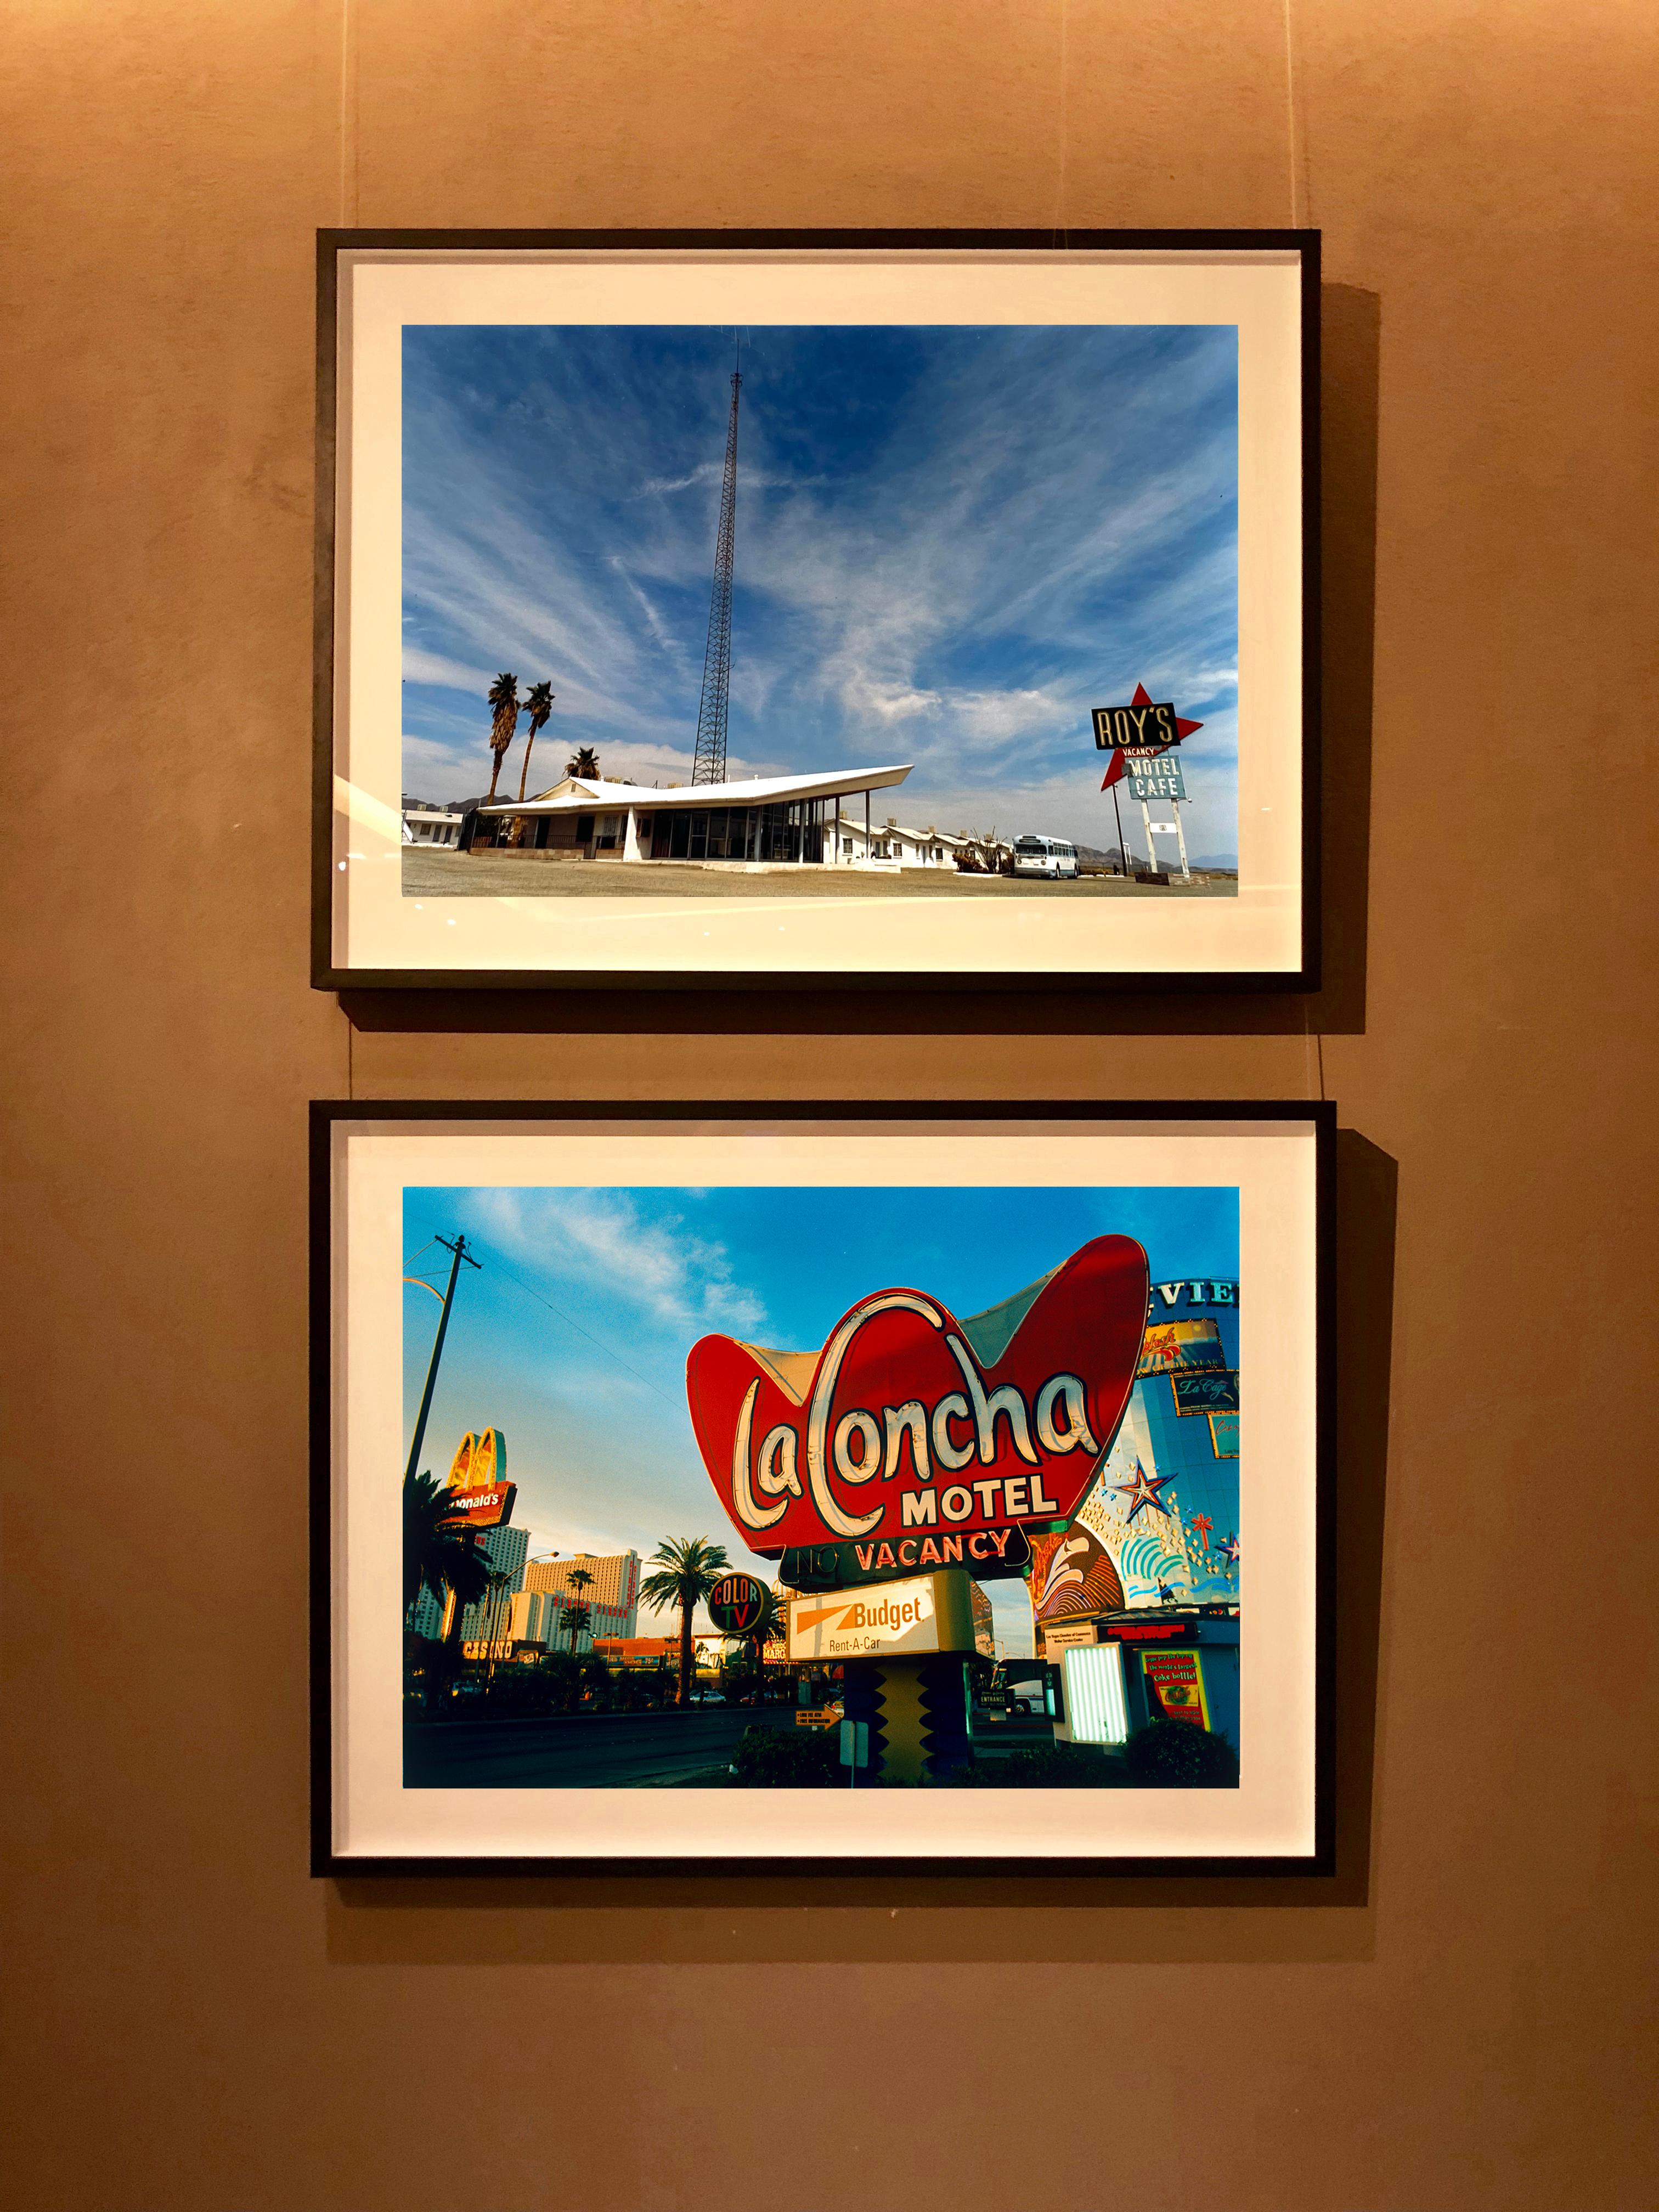 The iconic architecture of the La Concha Motel in Las Vegas, was captured by Richard Heeps for his 'Dream in Colour' series, before its closure in 2004. Designed by Paul Williams, it is synonymous of the Googie style architecture popular in America